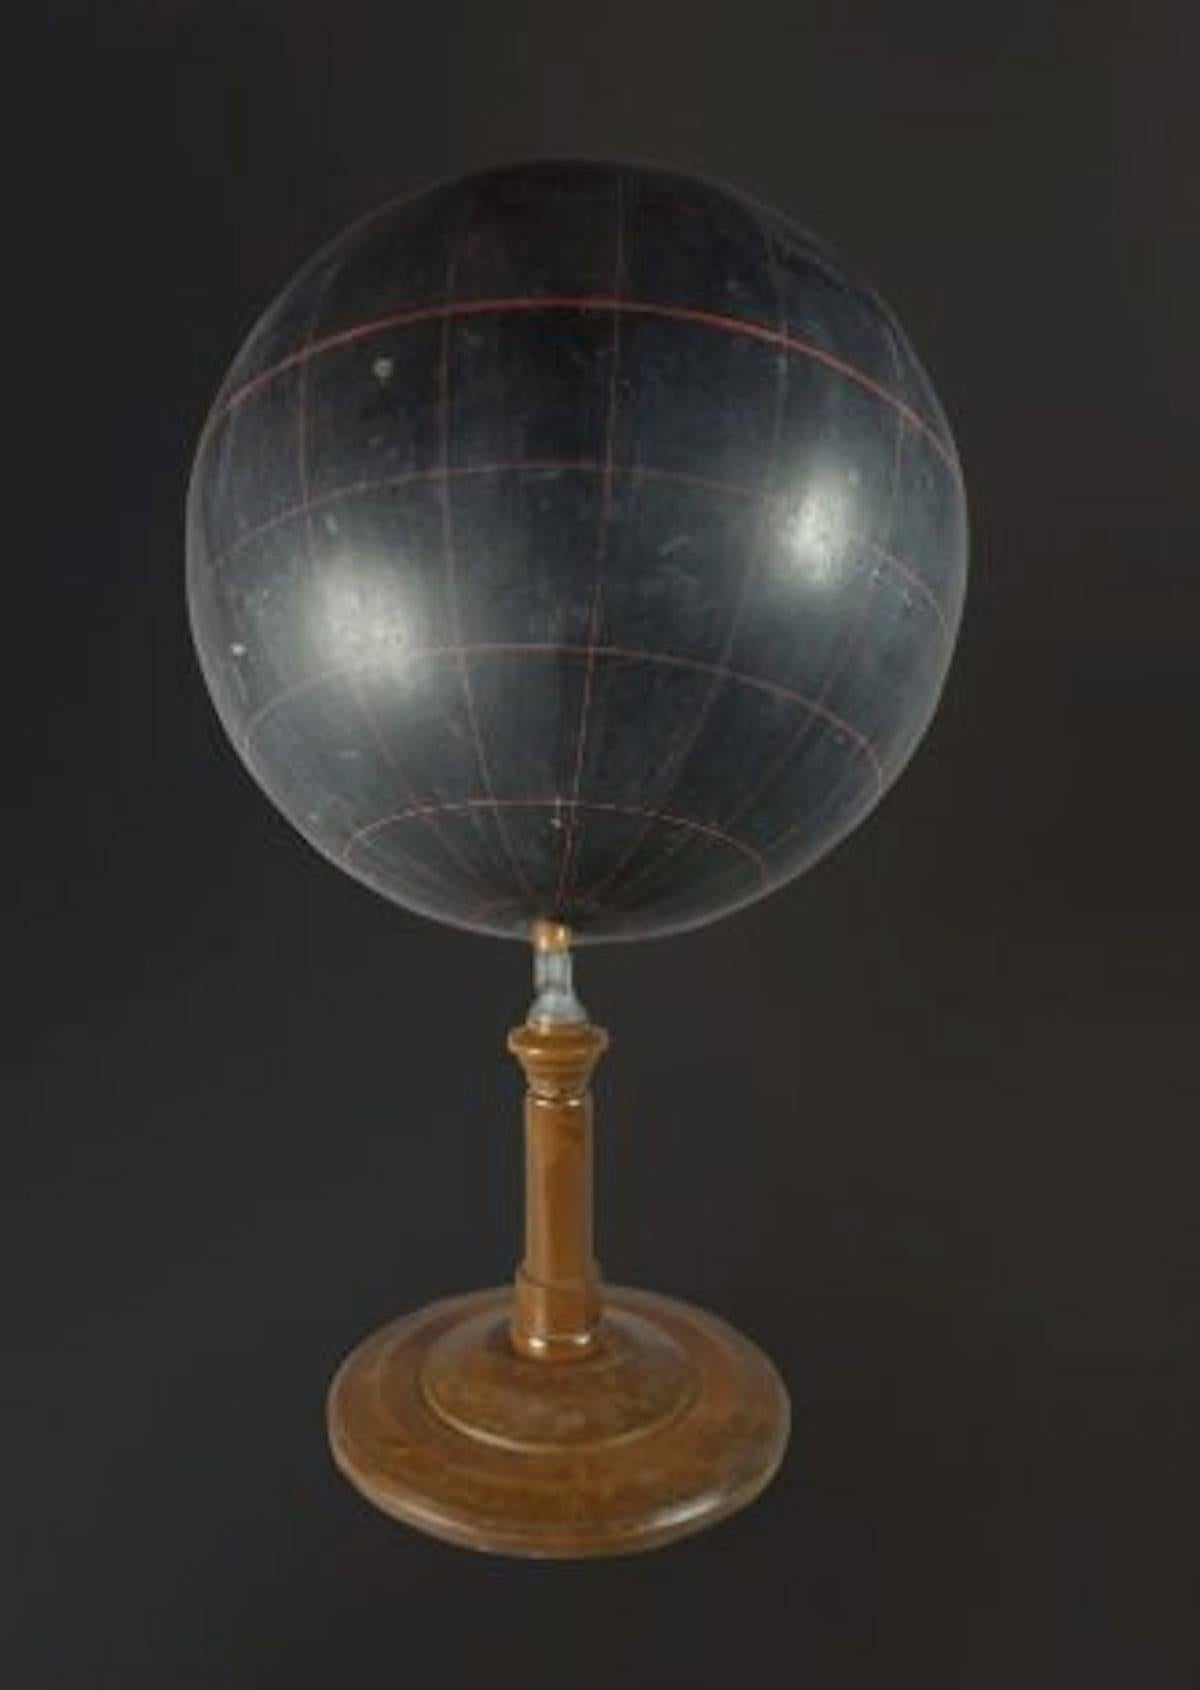 1930s French very sculptural chalk globe used for teaching. One was able to use chalk and draw on the globe. Makes a great table top decorative object.
     